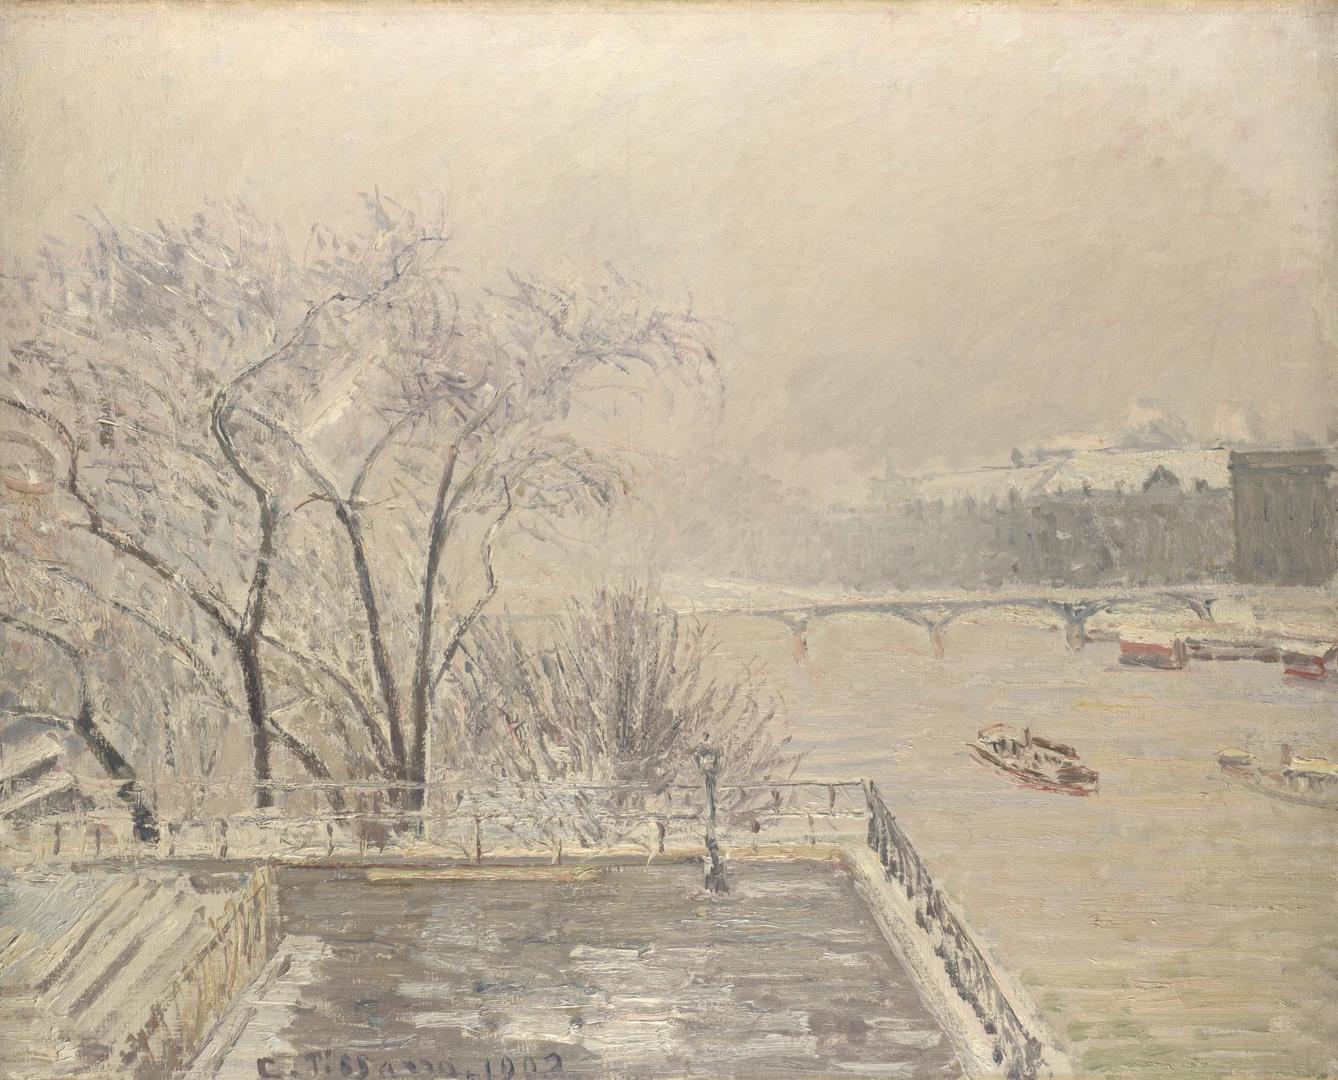 The Louvre under Snow by Camille Pissarro